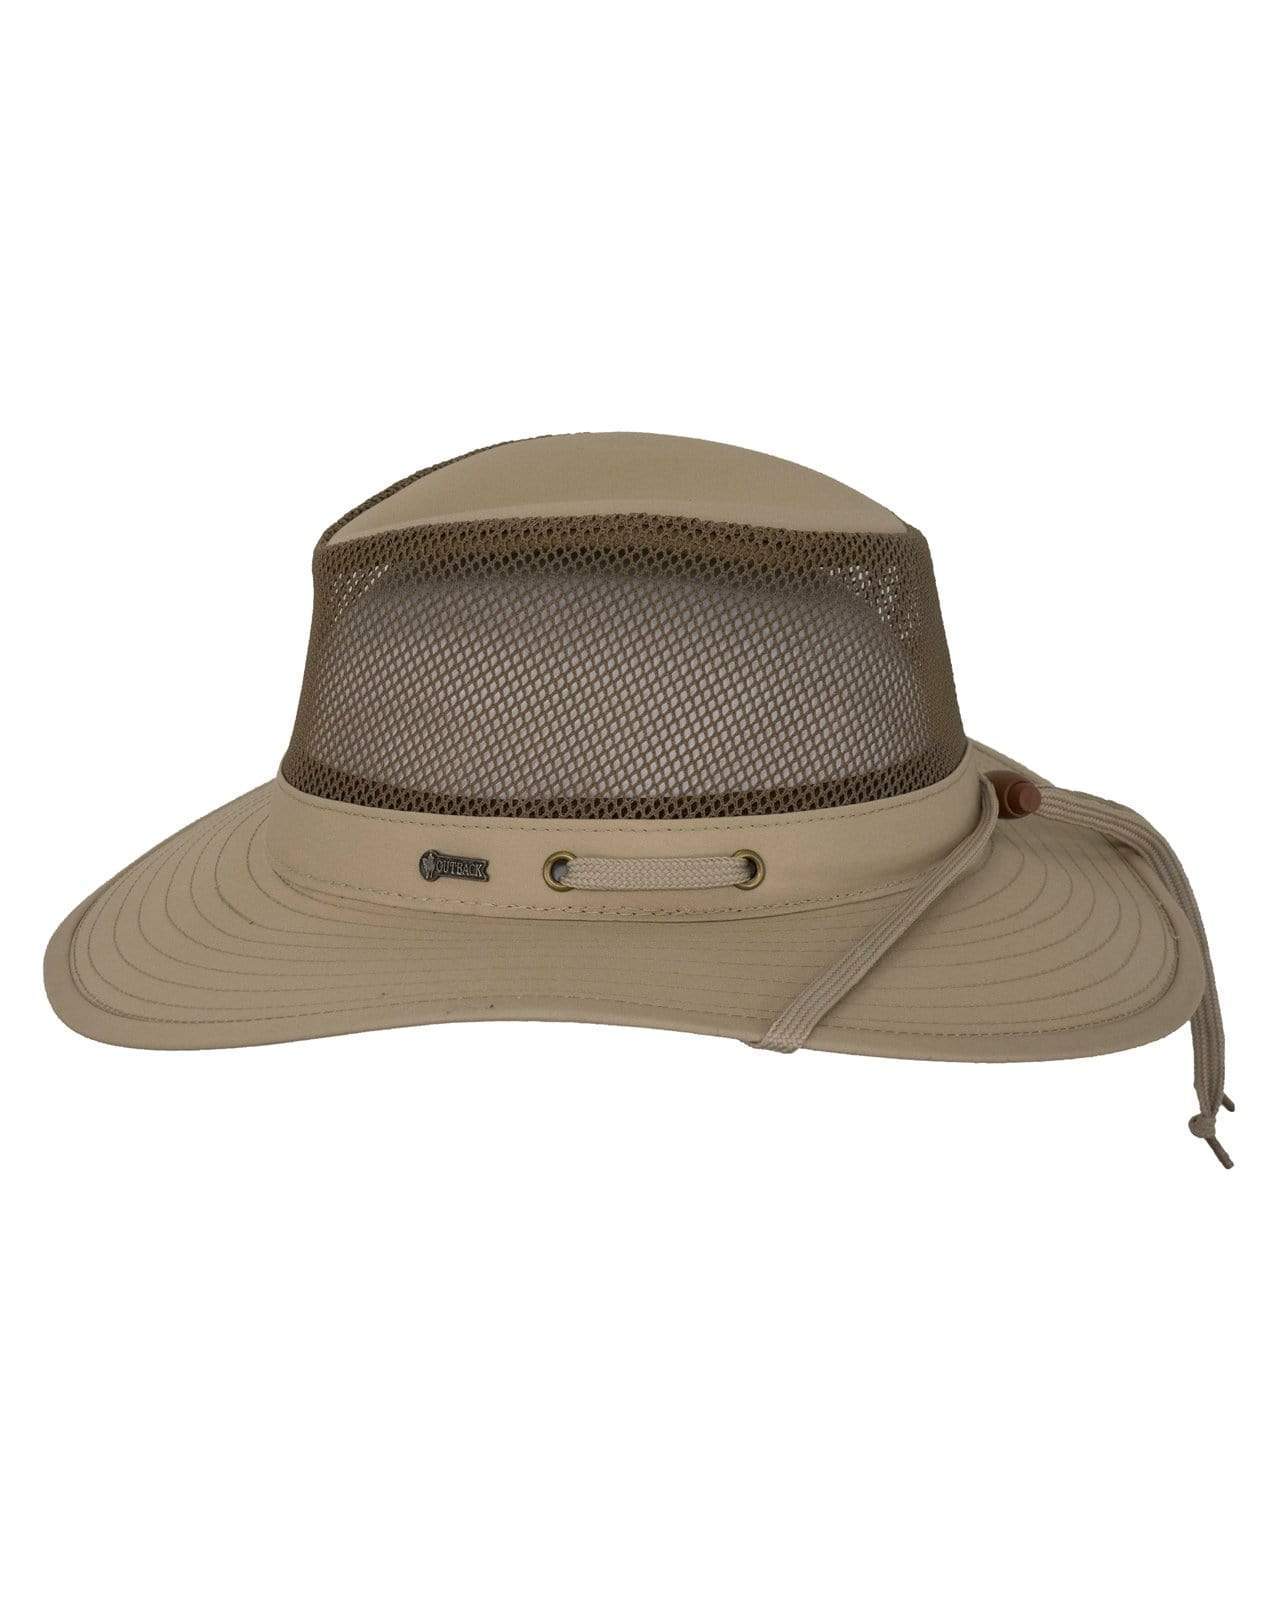 Outback Trading River Guide with Mesh II Hat (14726)